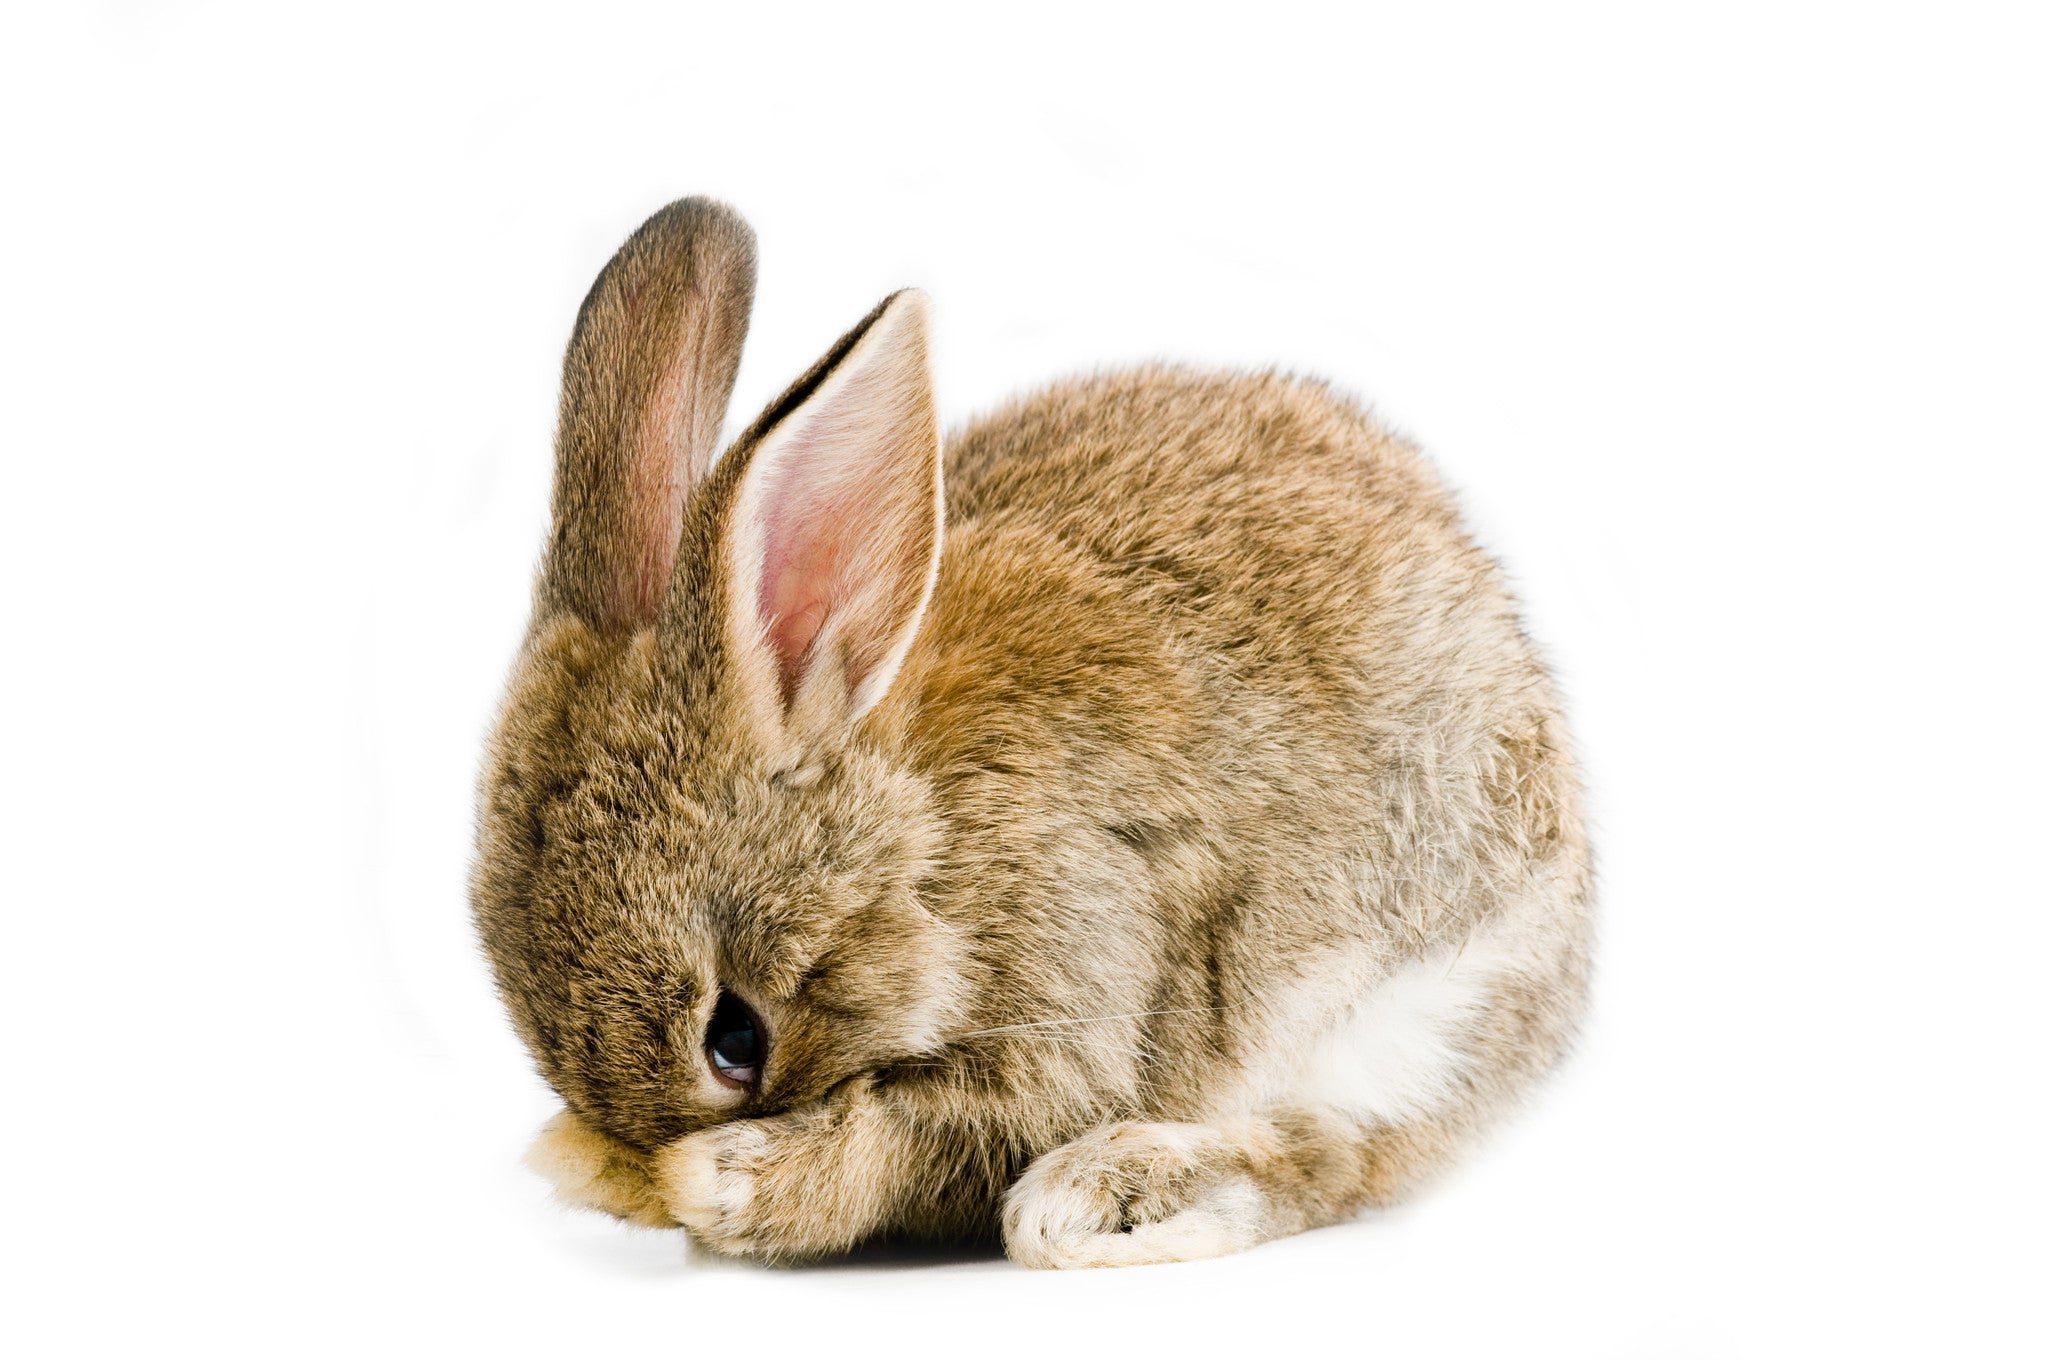 Don't be a bunny, prepare for new laser standards and guidelines now